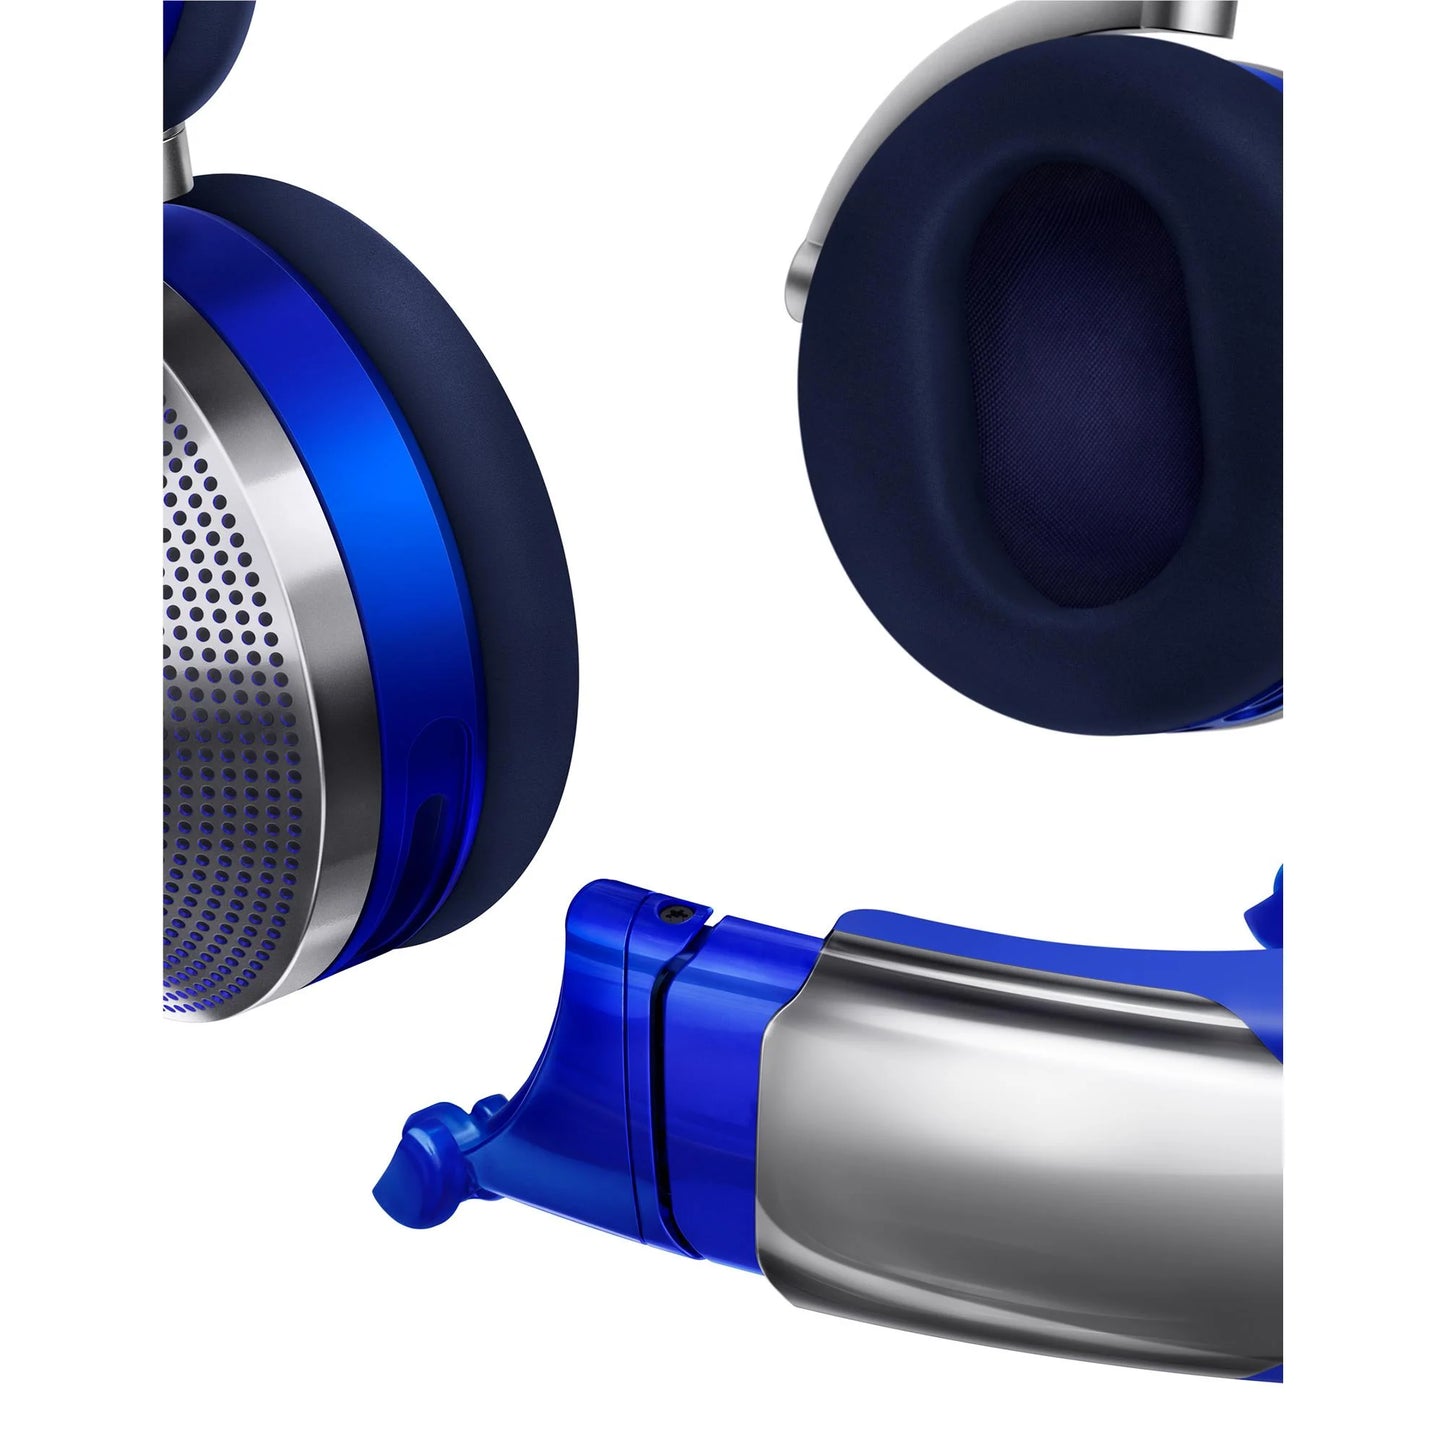 Dyson Zone Air Purifying Wireless Over-Ear Headphones